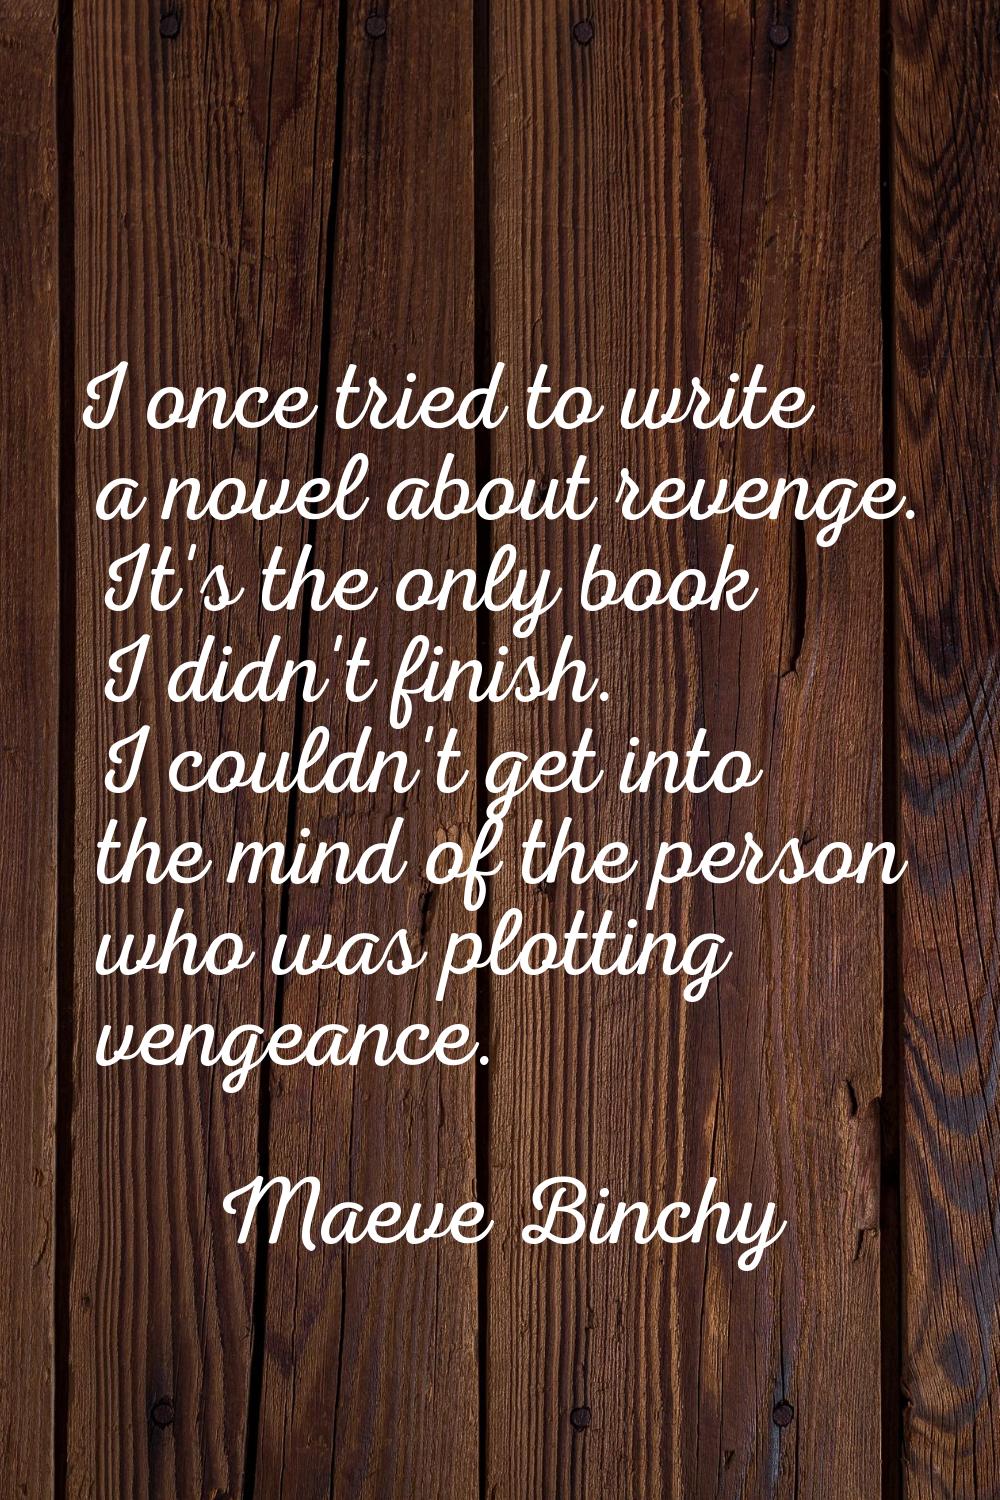 I once tried to write a novel about revenge. It's the only book I didn't finish. I couldn't get int